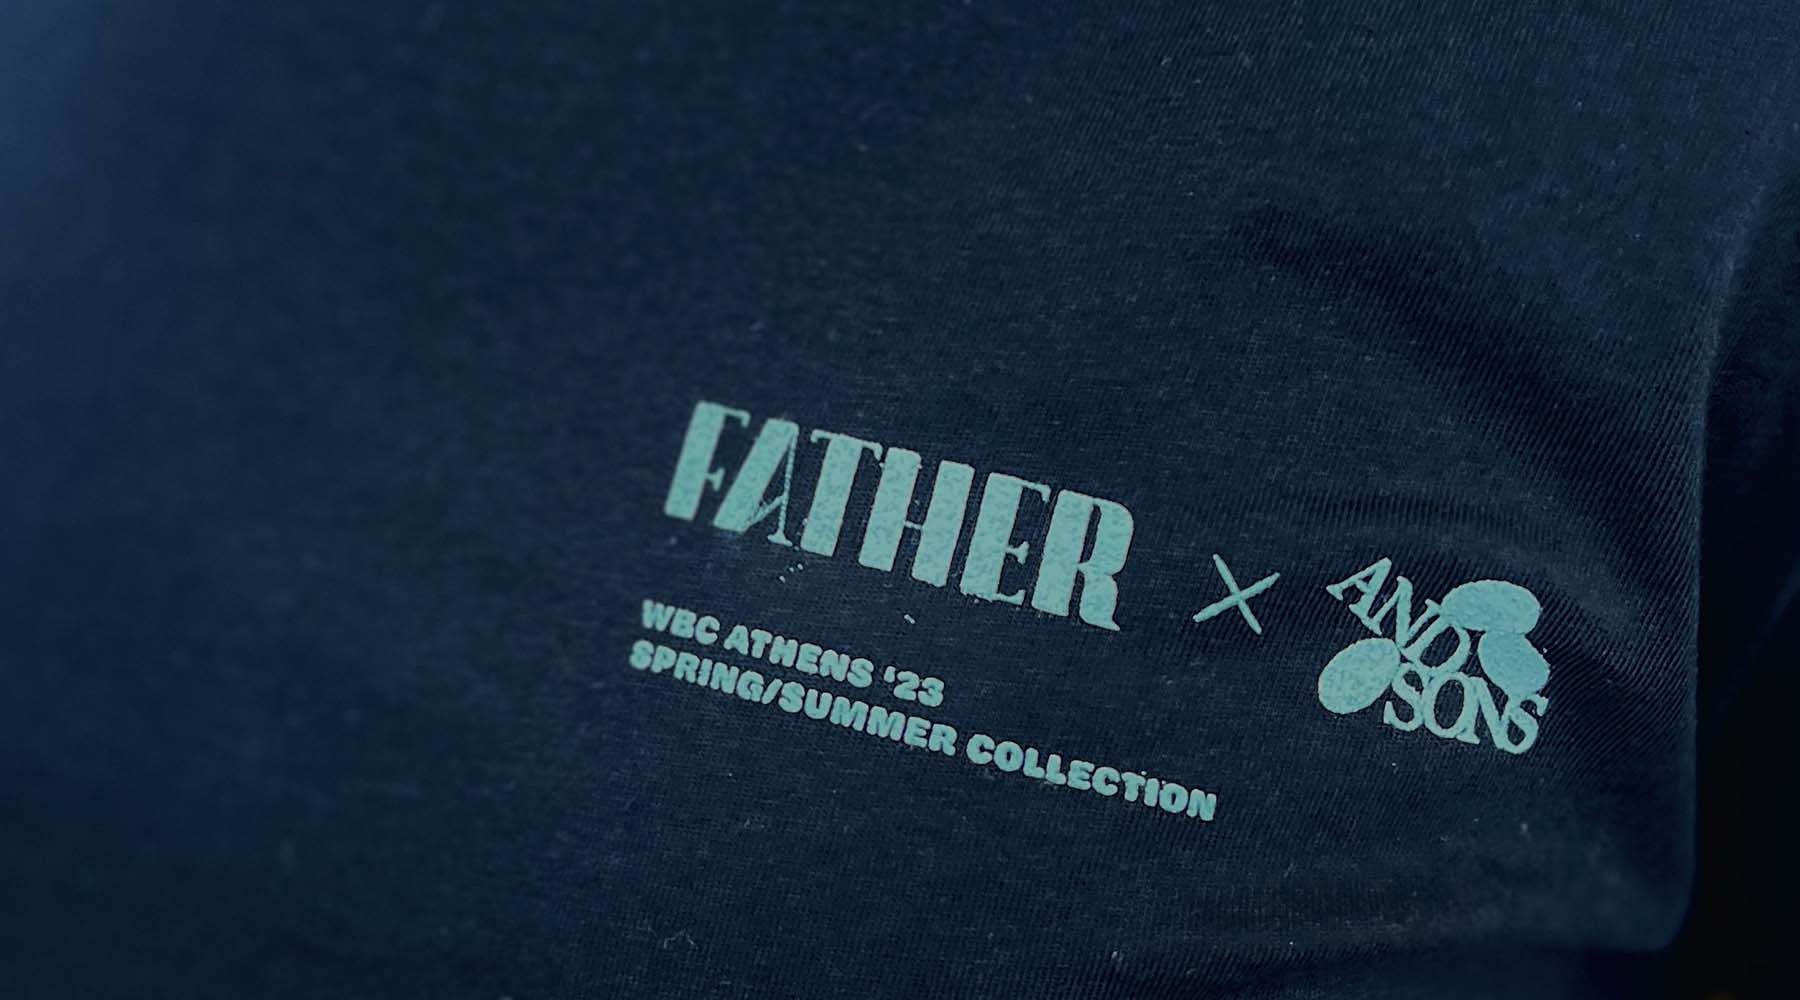 WBC Athens '23 Official Tee